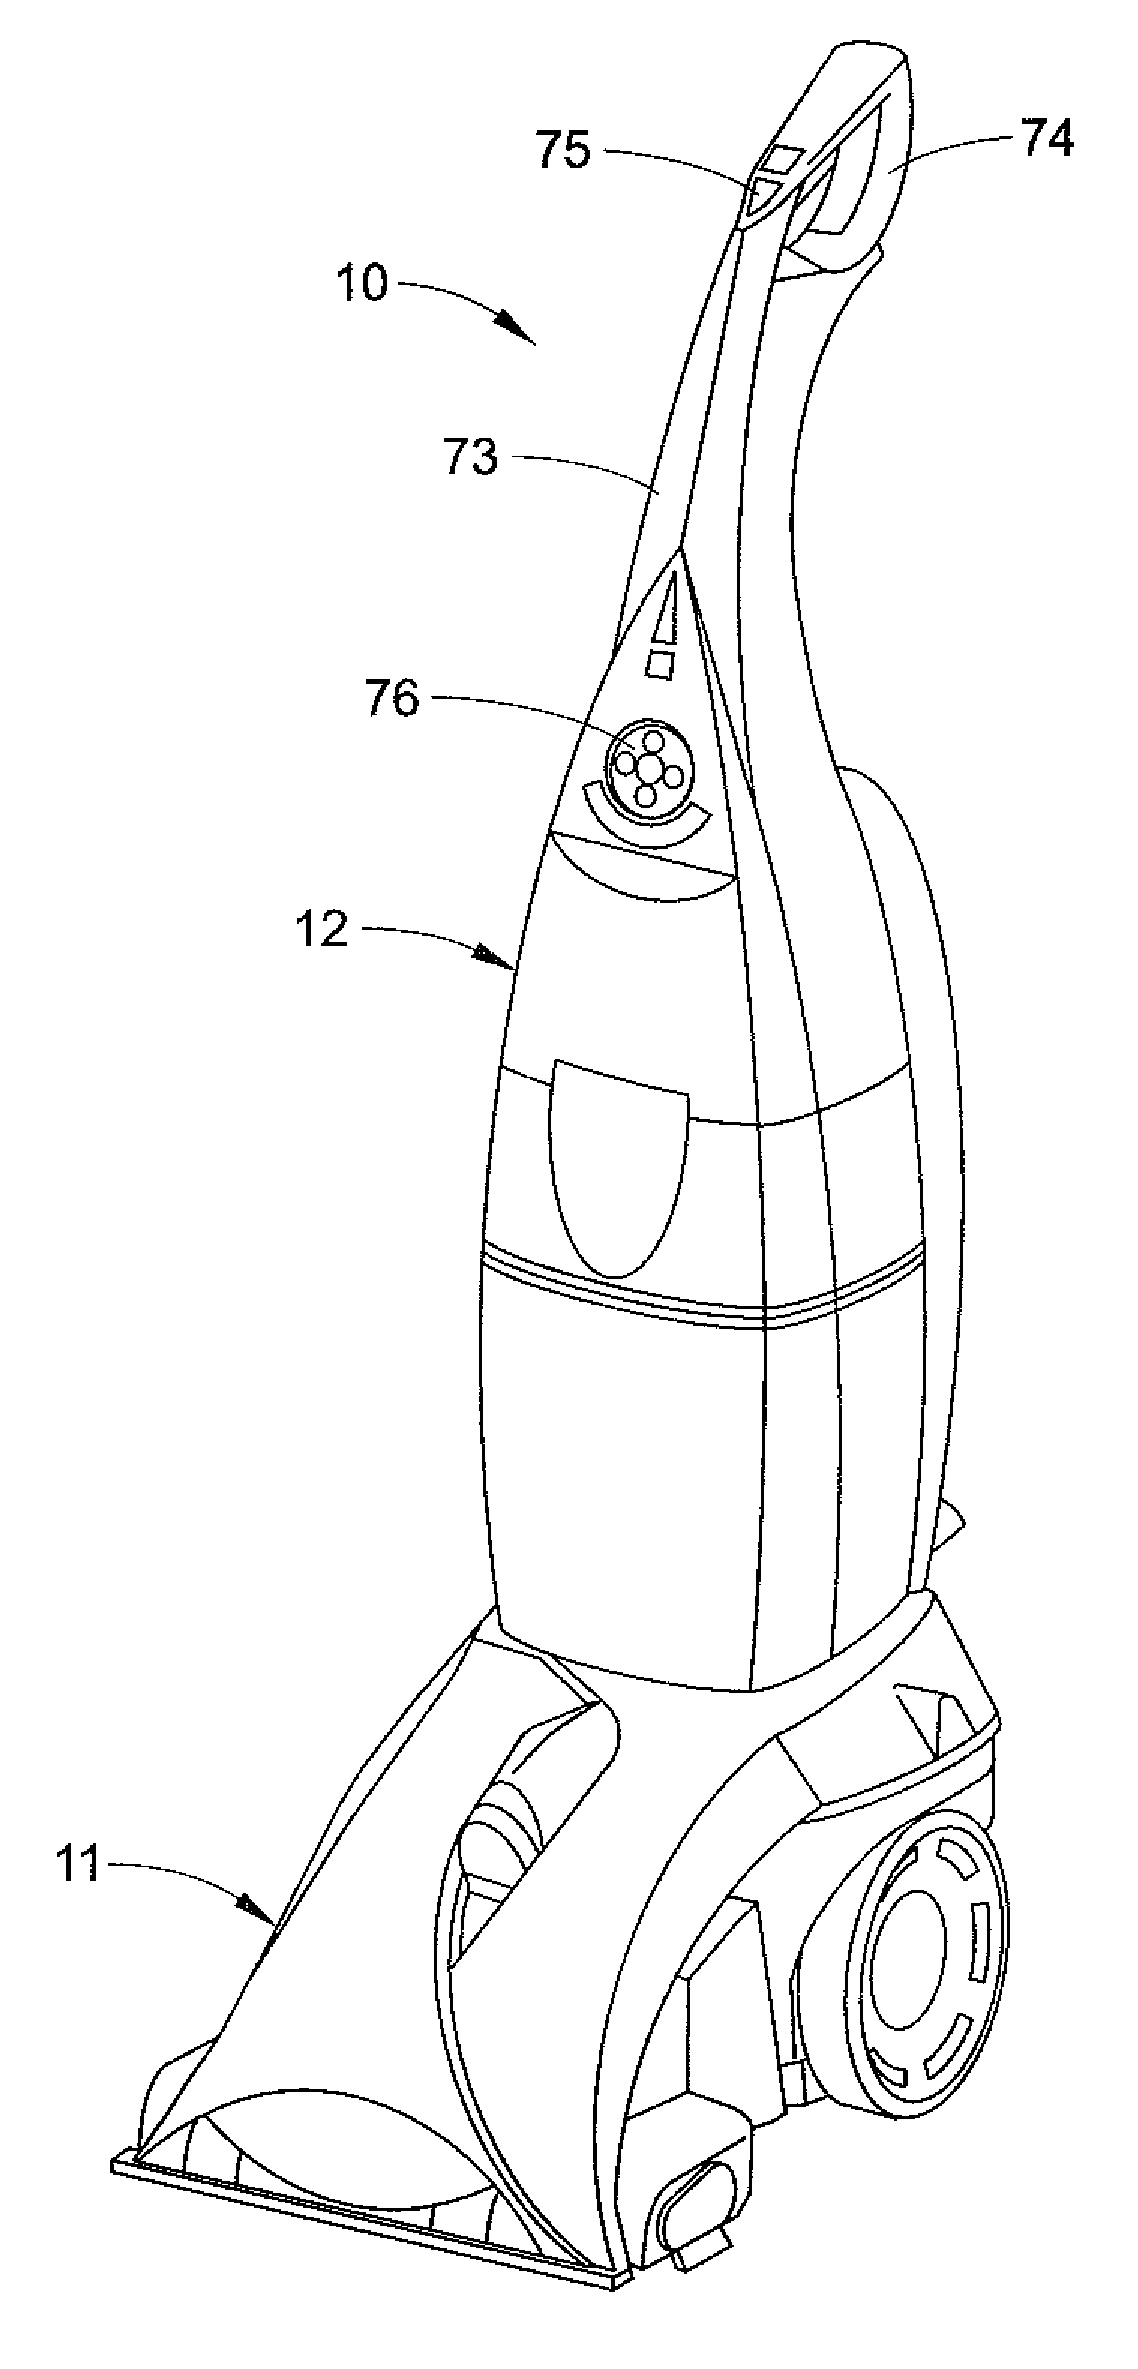 Extraction cleaning apparatus